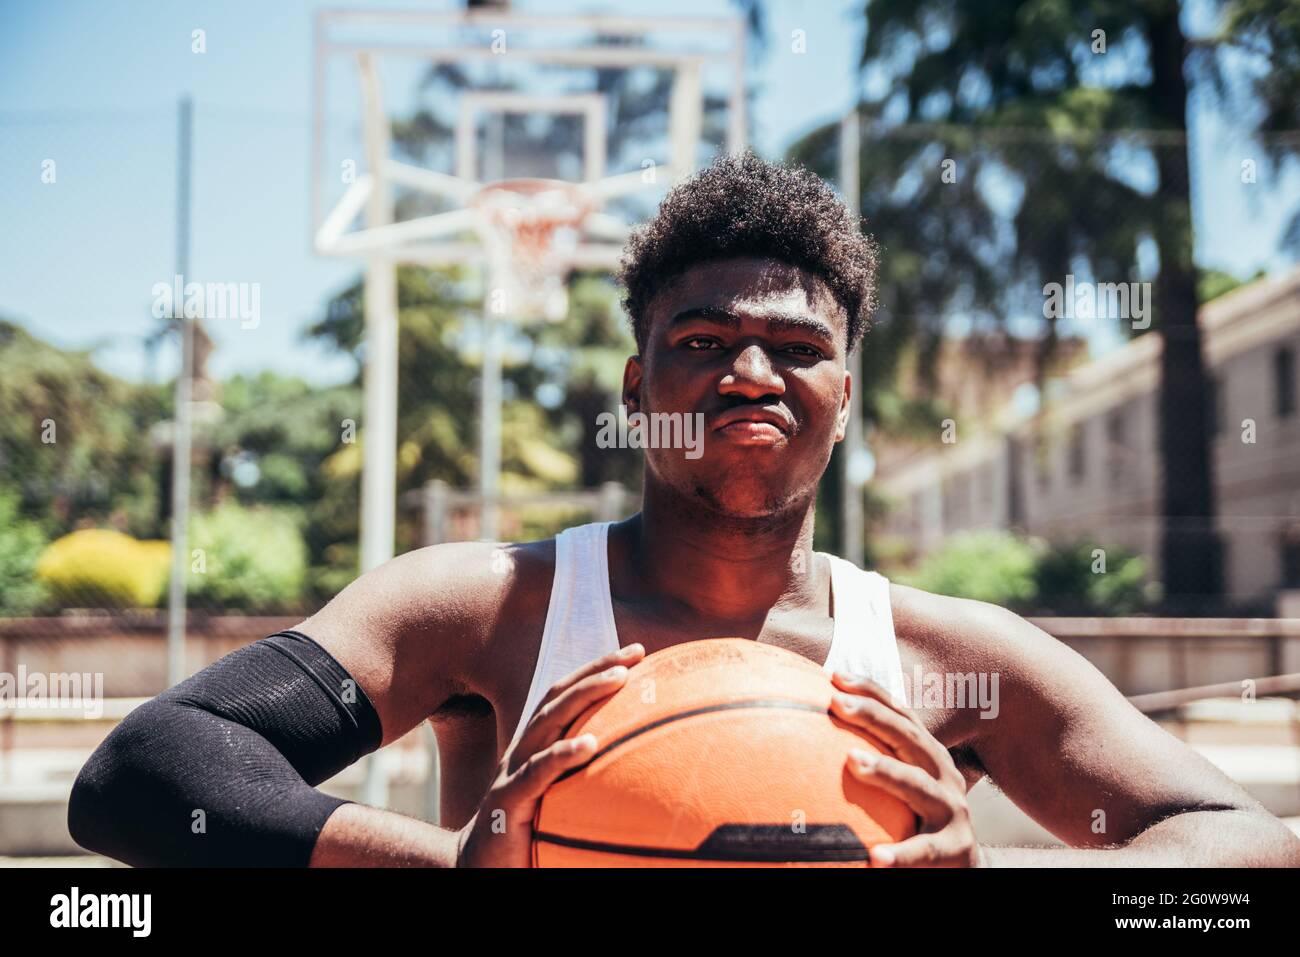 Portrait of a furious black Afro boy with a defiant look squeezing the basketball with his hands. Ready to play a game. Stock Photo